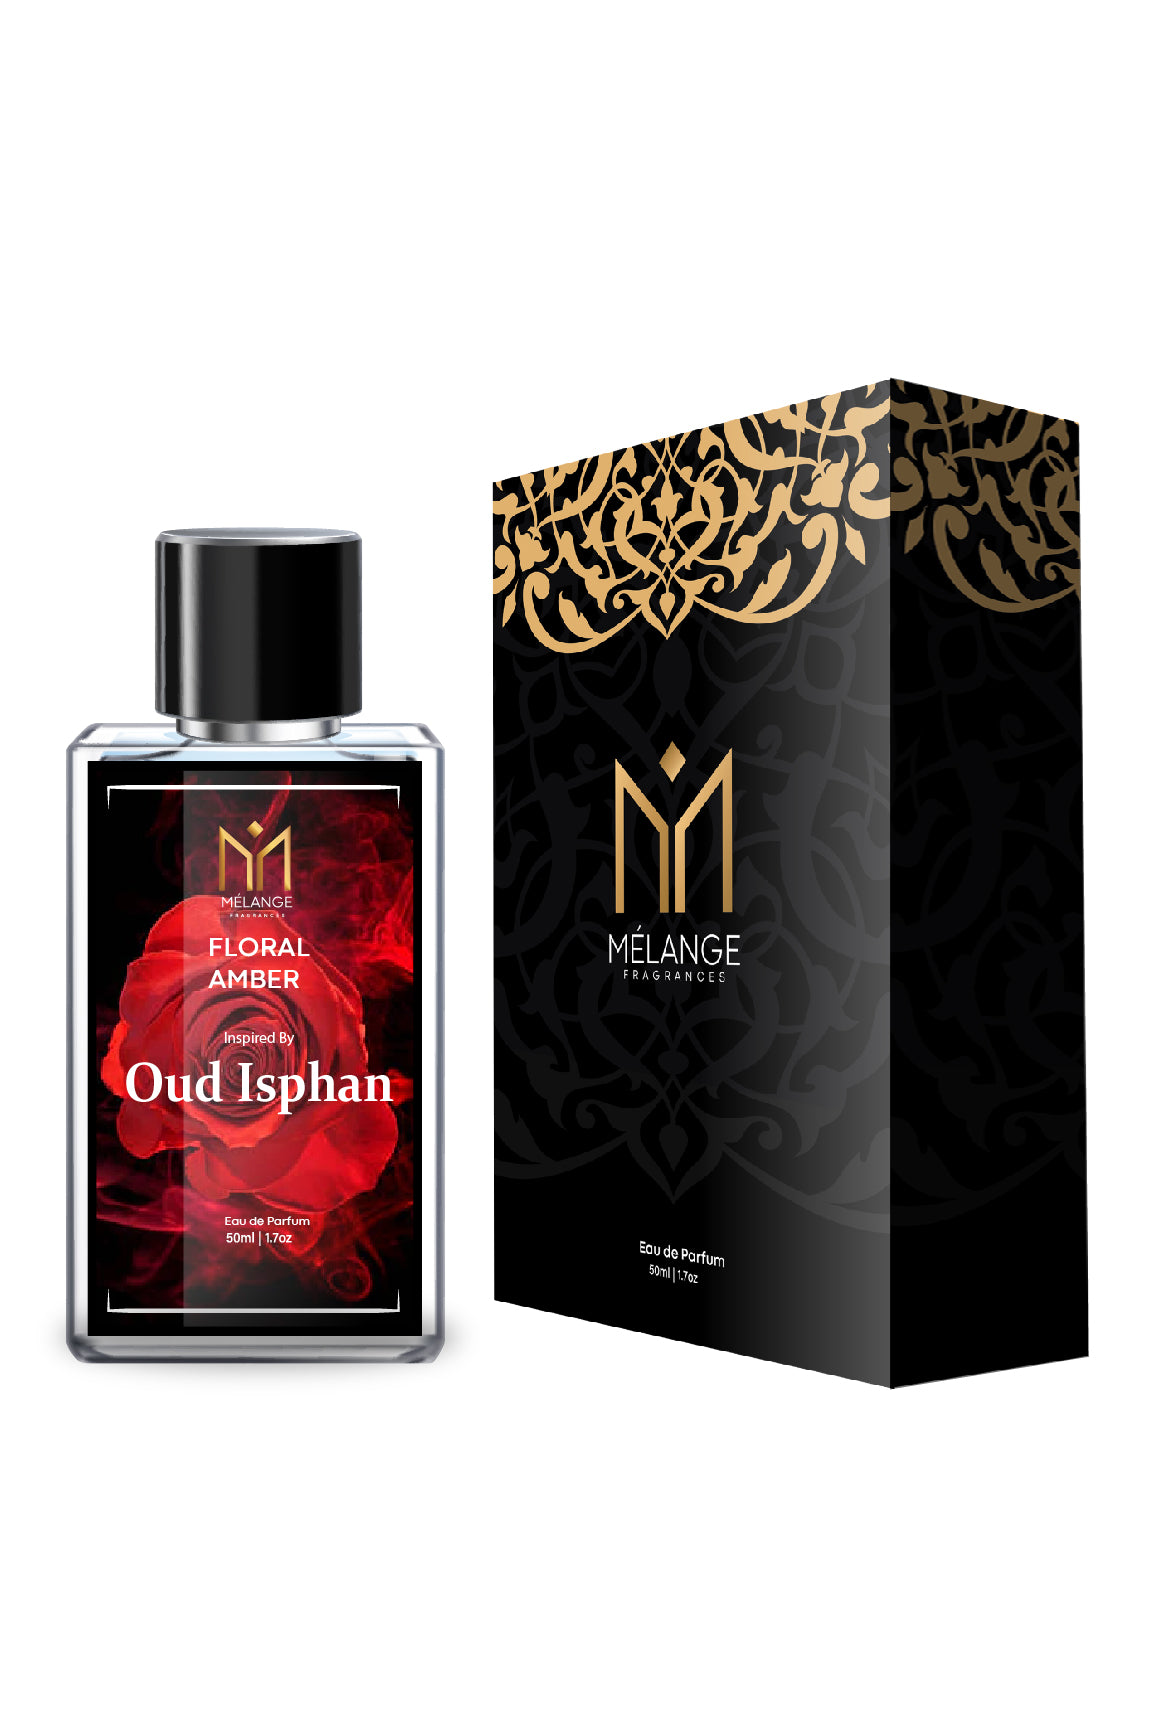 FLORAL AMBER - Inspired By Oud Isphan